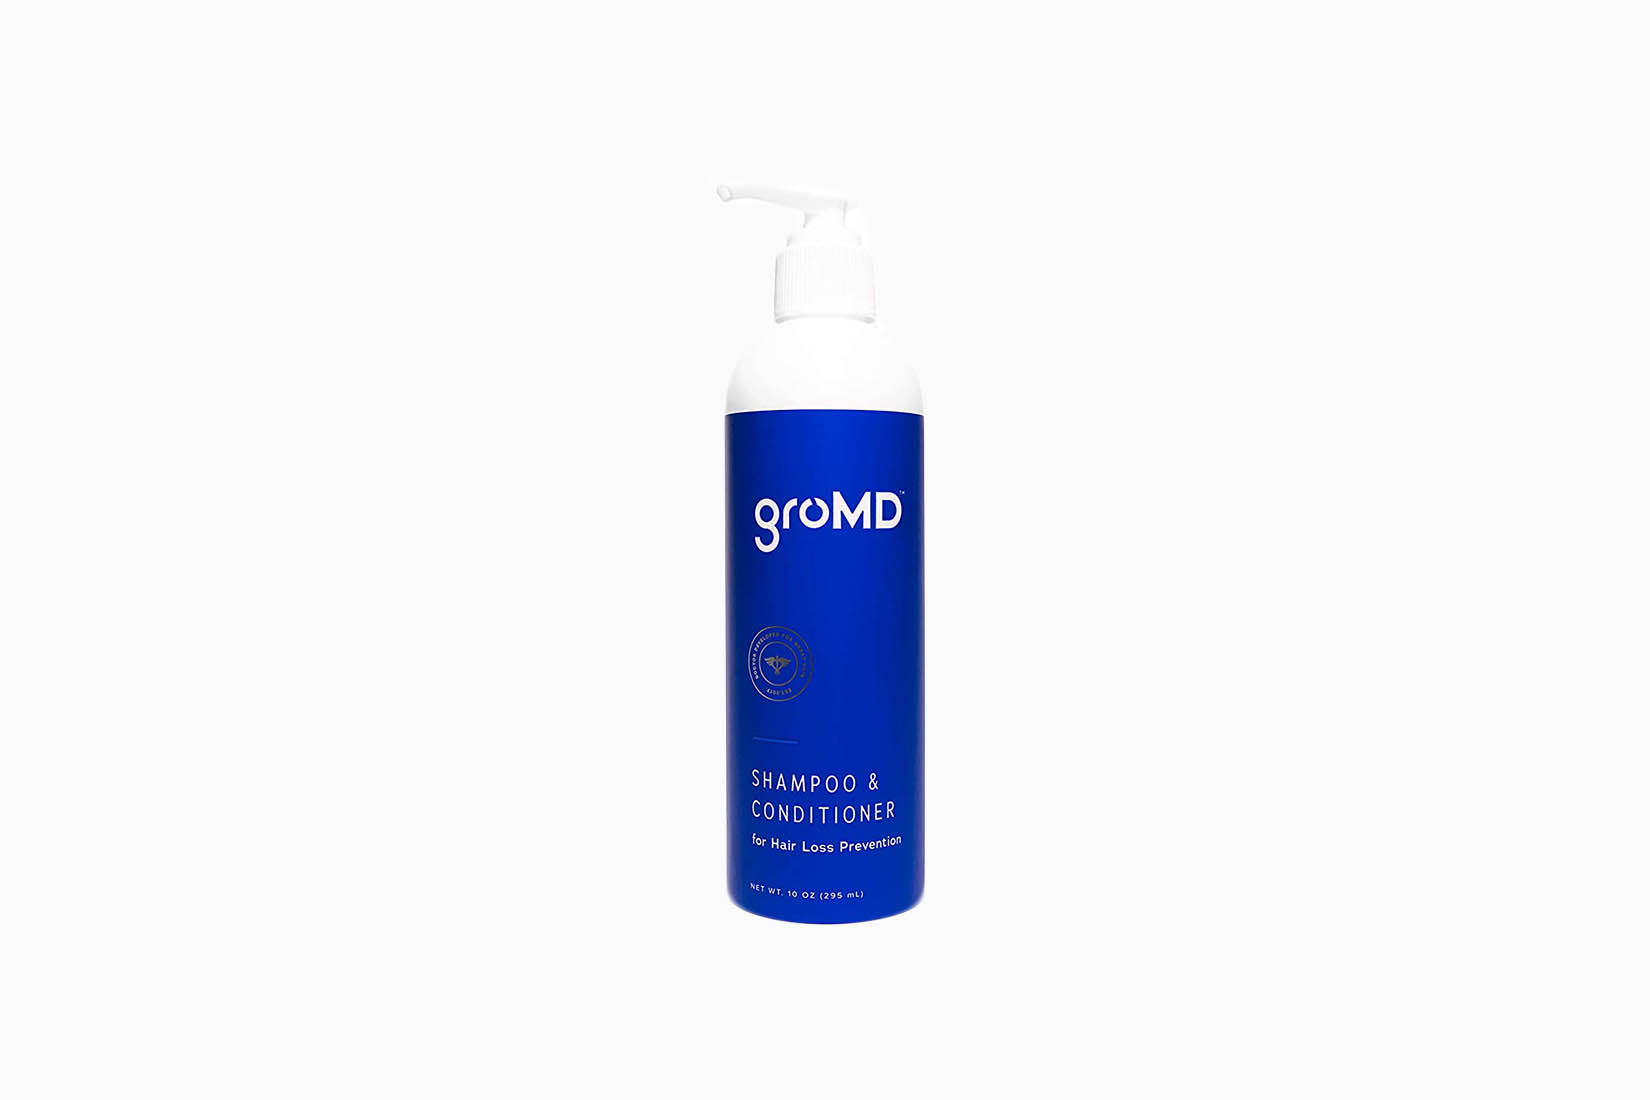 Meilleur shampooing anti-chute pour hommes Gromd Review - Luxe Digital